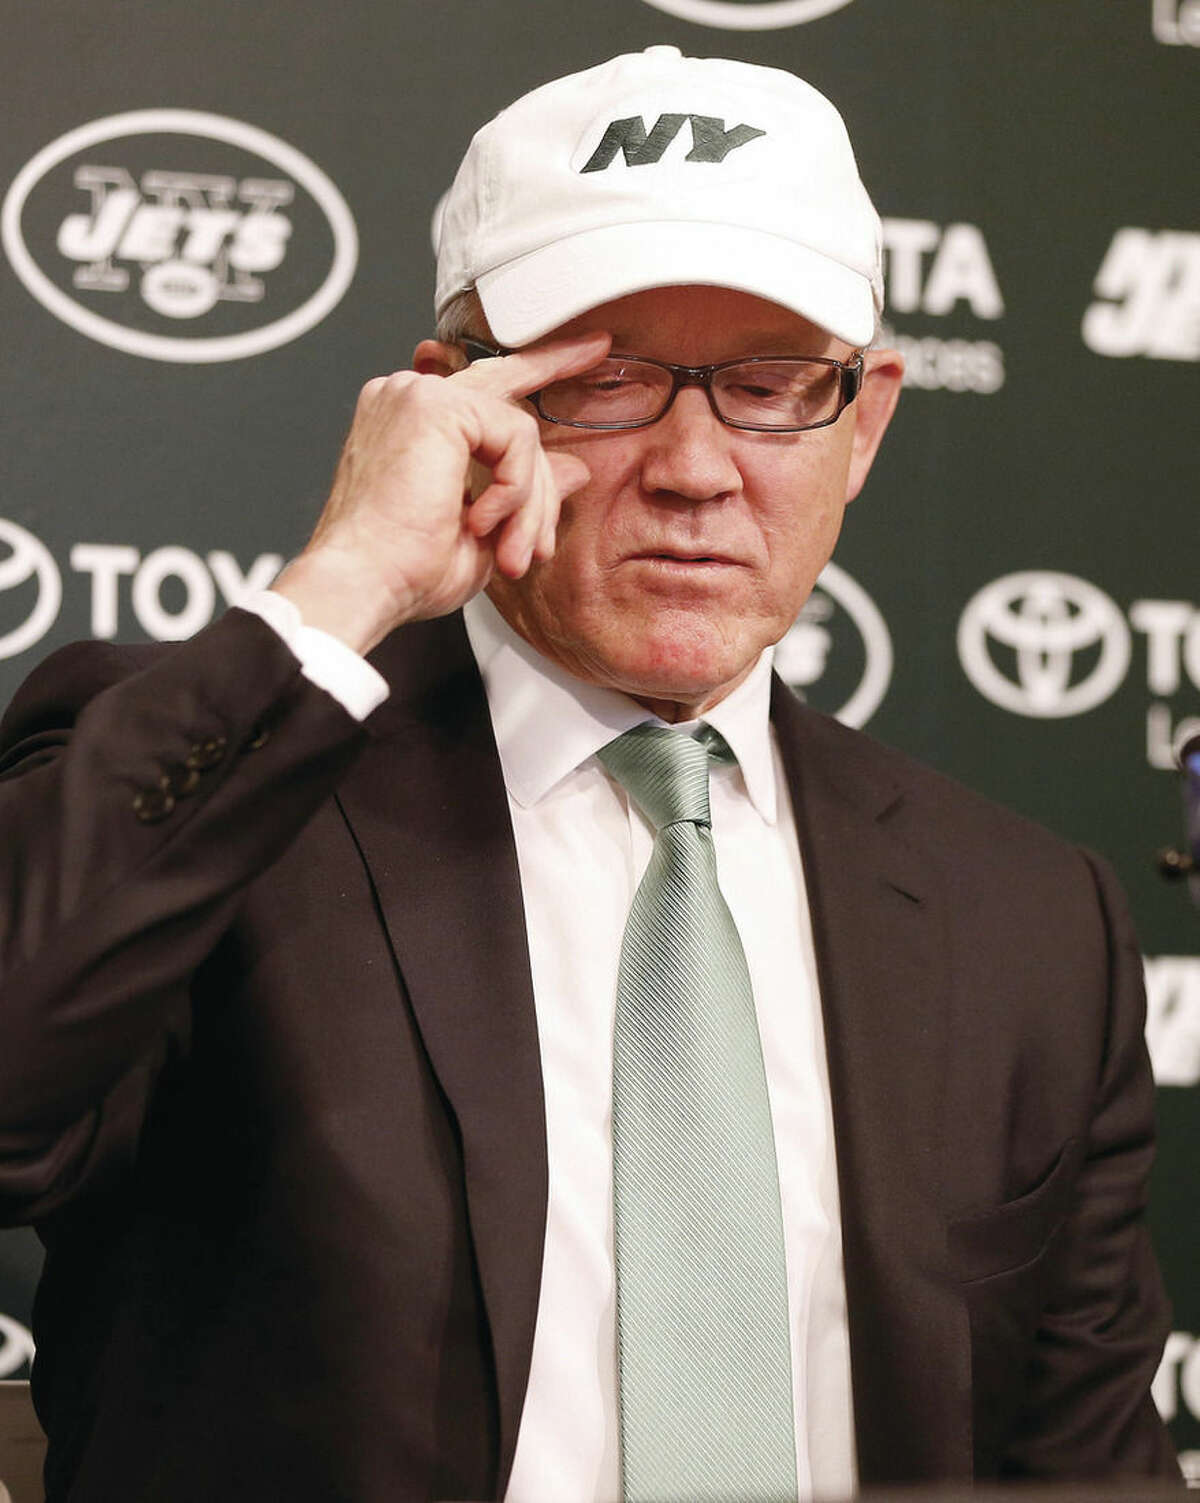 New York Jets owner Woody Johnson announces the firing of head coach Rex Ryan and general manager John Idzik at the team's practice facility in Florham Park, N.J., Monday, Dec. 29, 2014. (AP Photo/Rich Schultz)